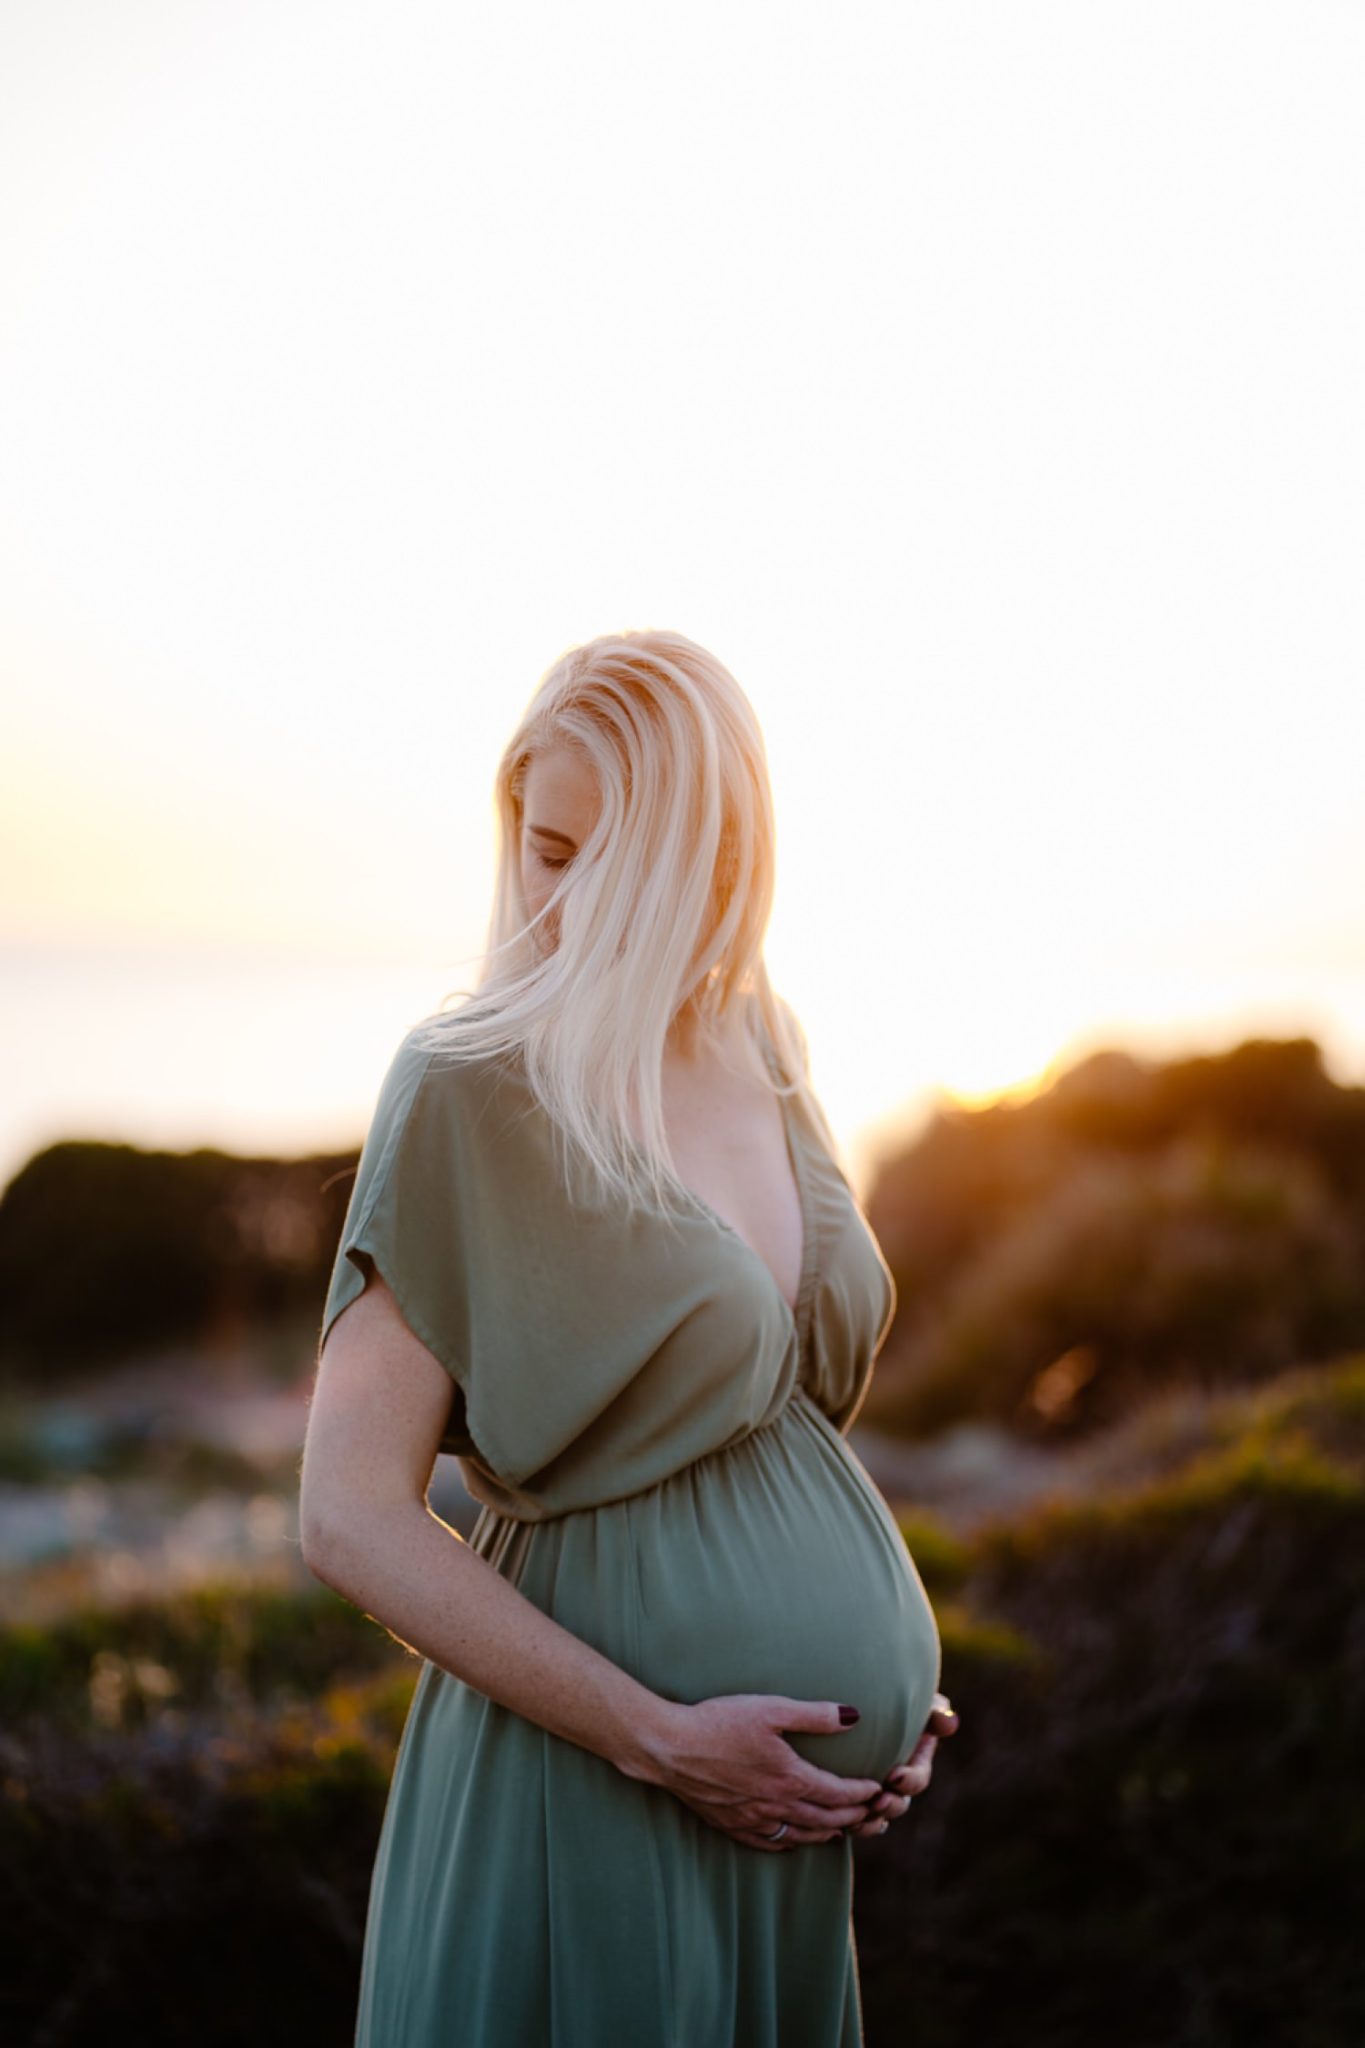 A stunning maternity photo taken in the beautiful coastal town of Alghero. The mother-to-be stands on a rocky beach with her flowing white dress blending in perfectly with the waves crashing behind her.